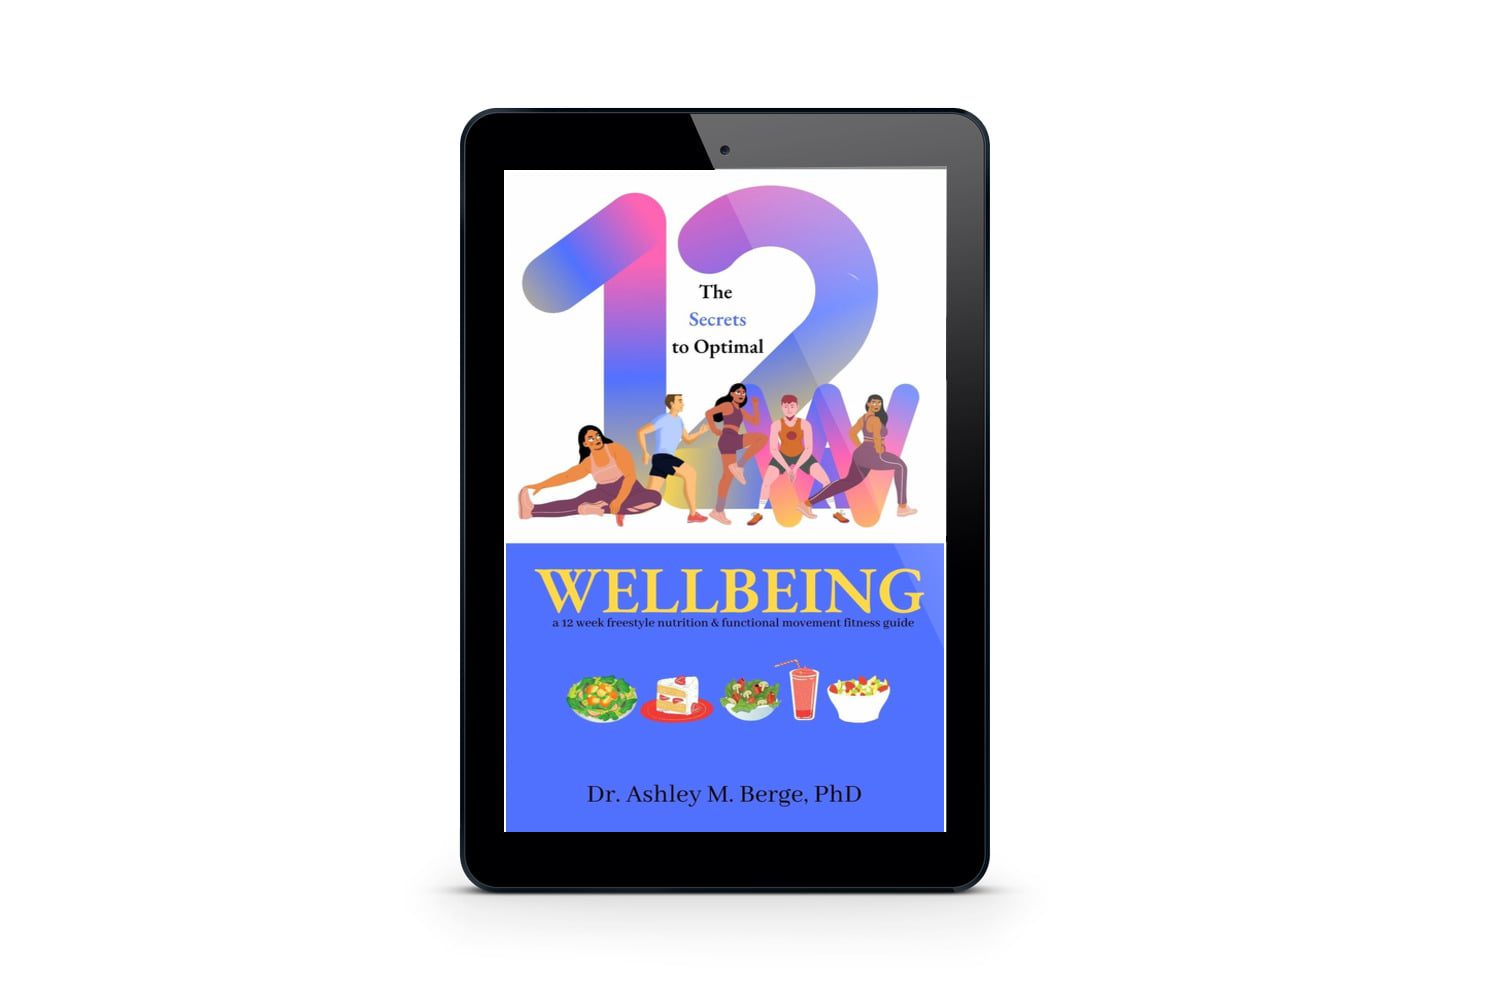 The Secrets to Optimal <a href="https://am8international.com/product/rrp-the-secrets-to-optimal-wellbeing-download-only/" data-type="product" data-id="17589" rel="nofollow">Wellbeing</a>